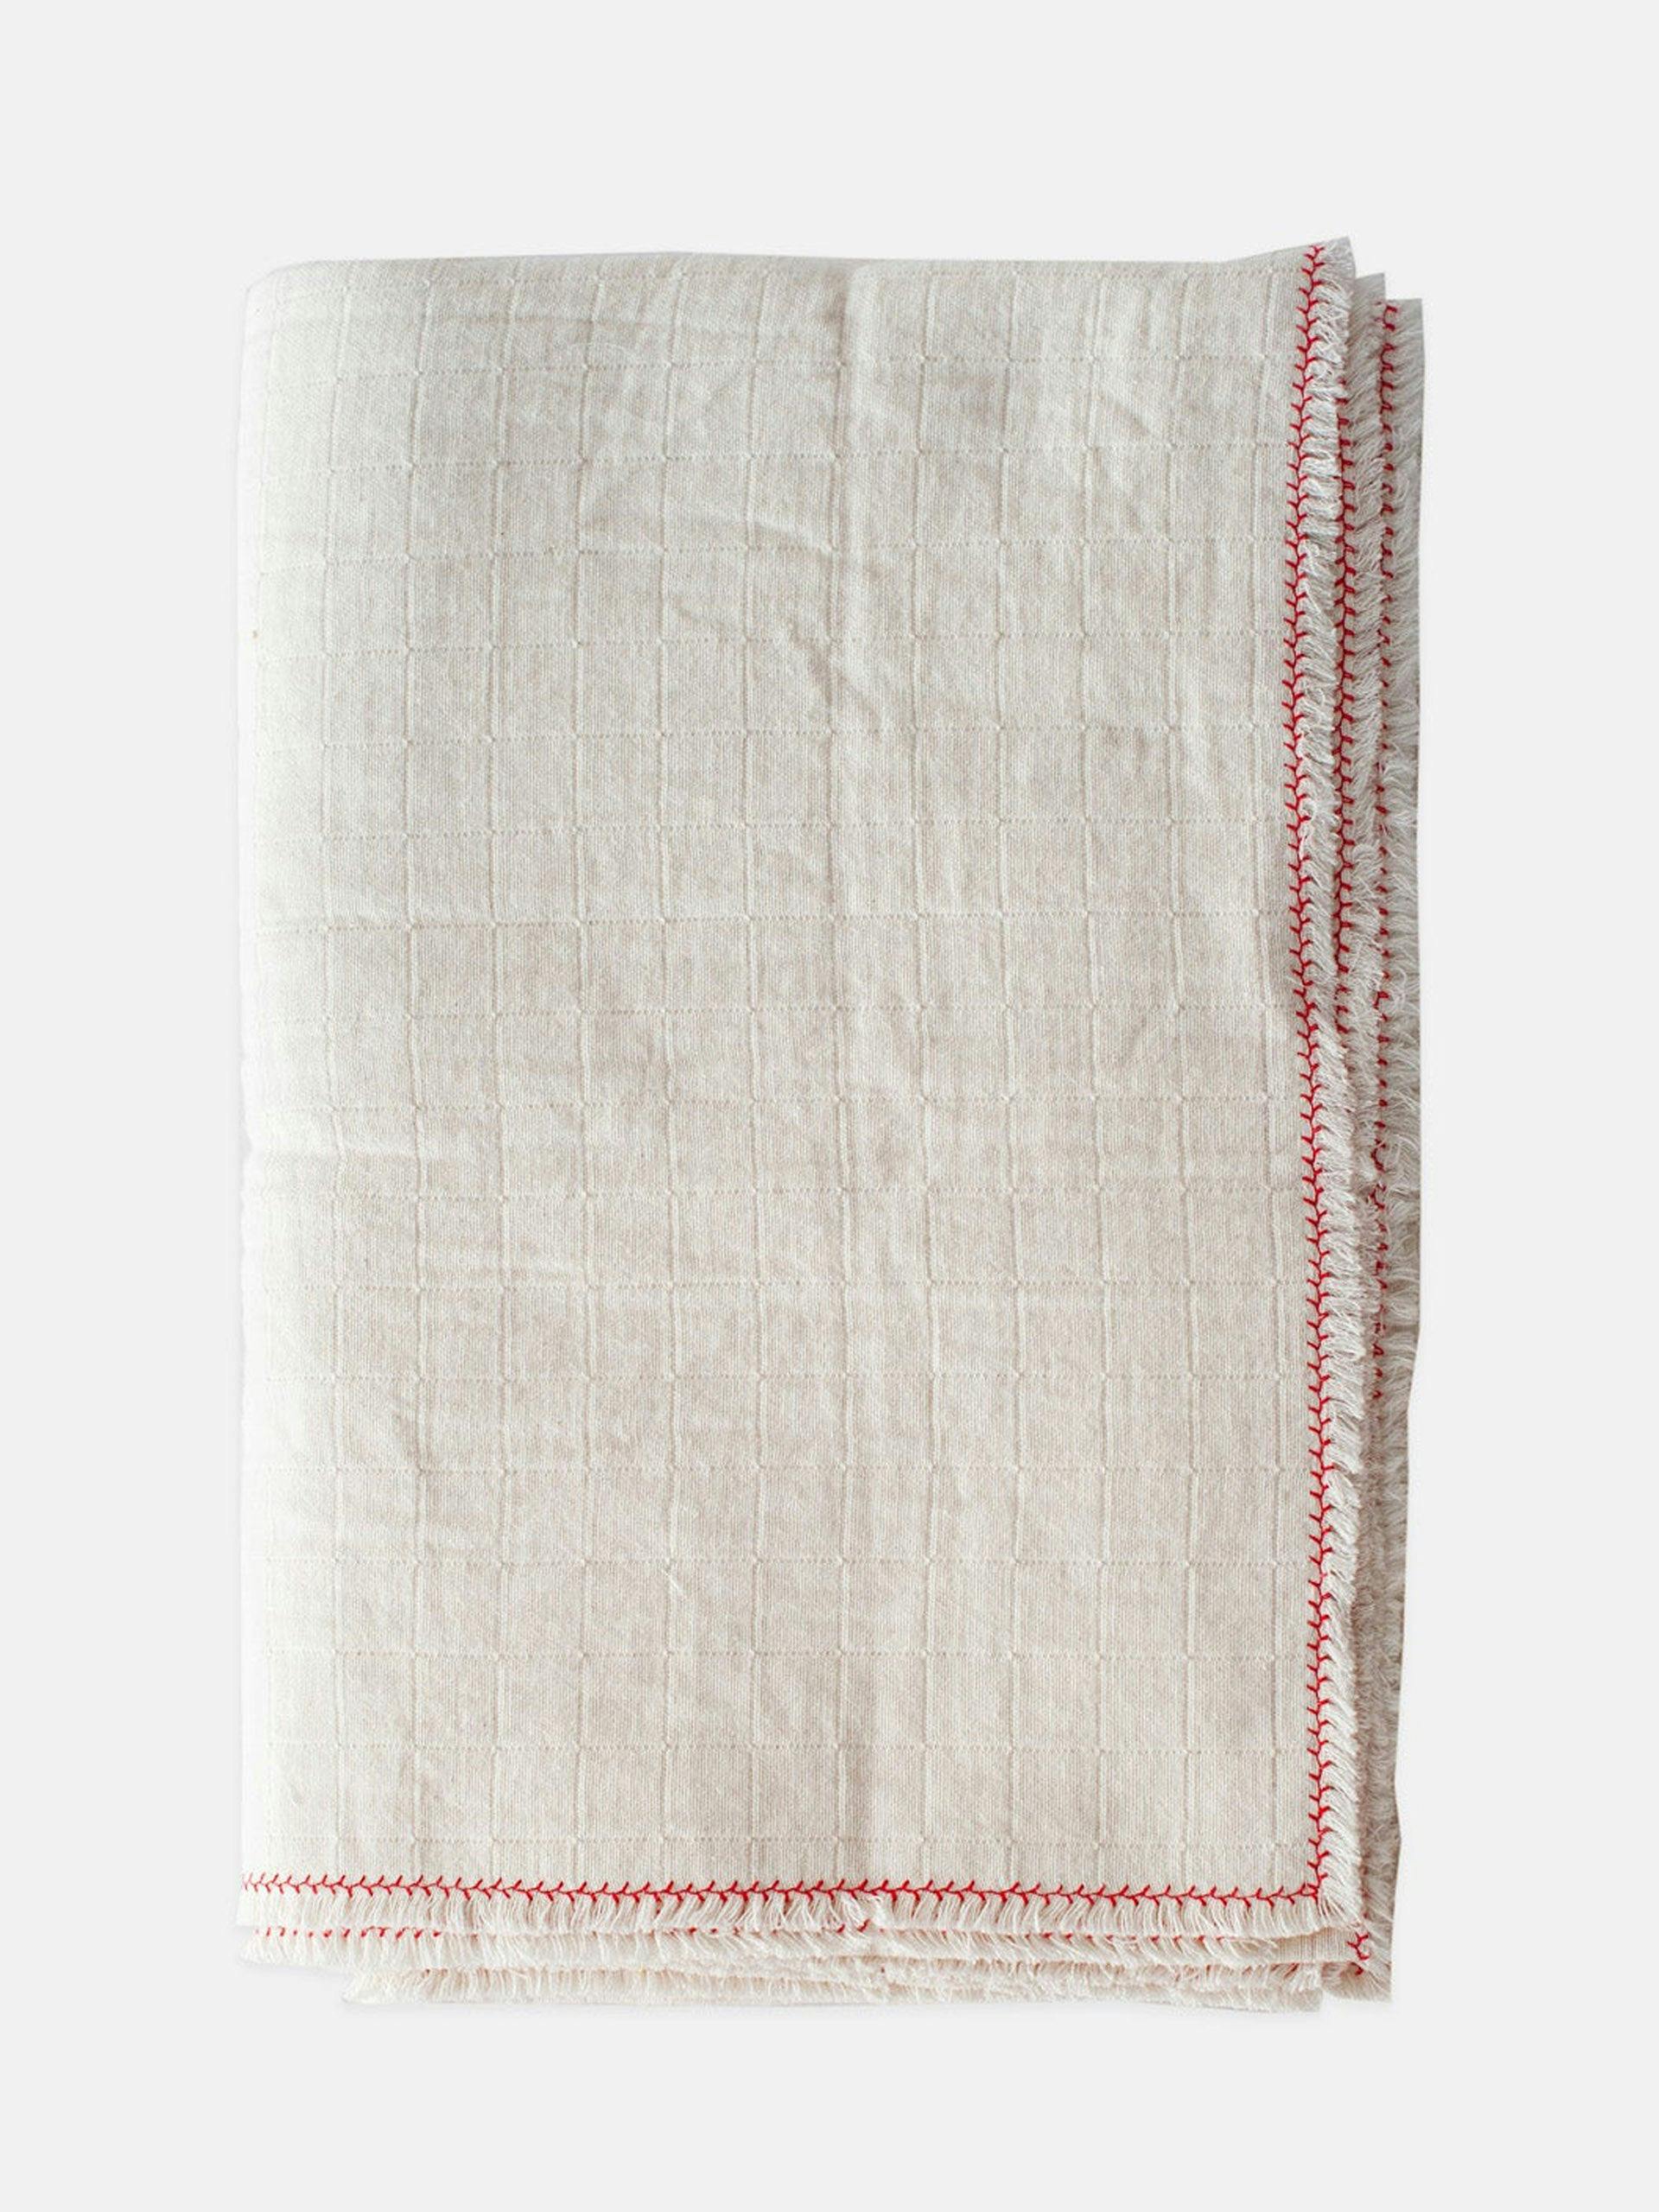 Natural table cloth with red branch